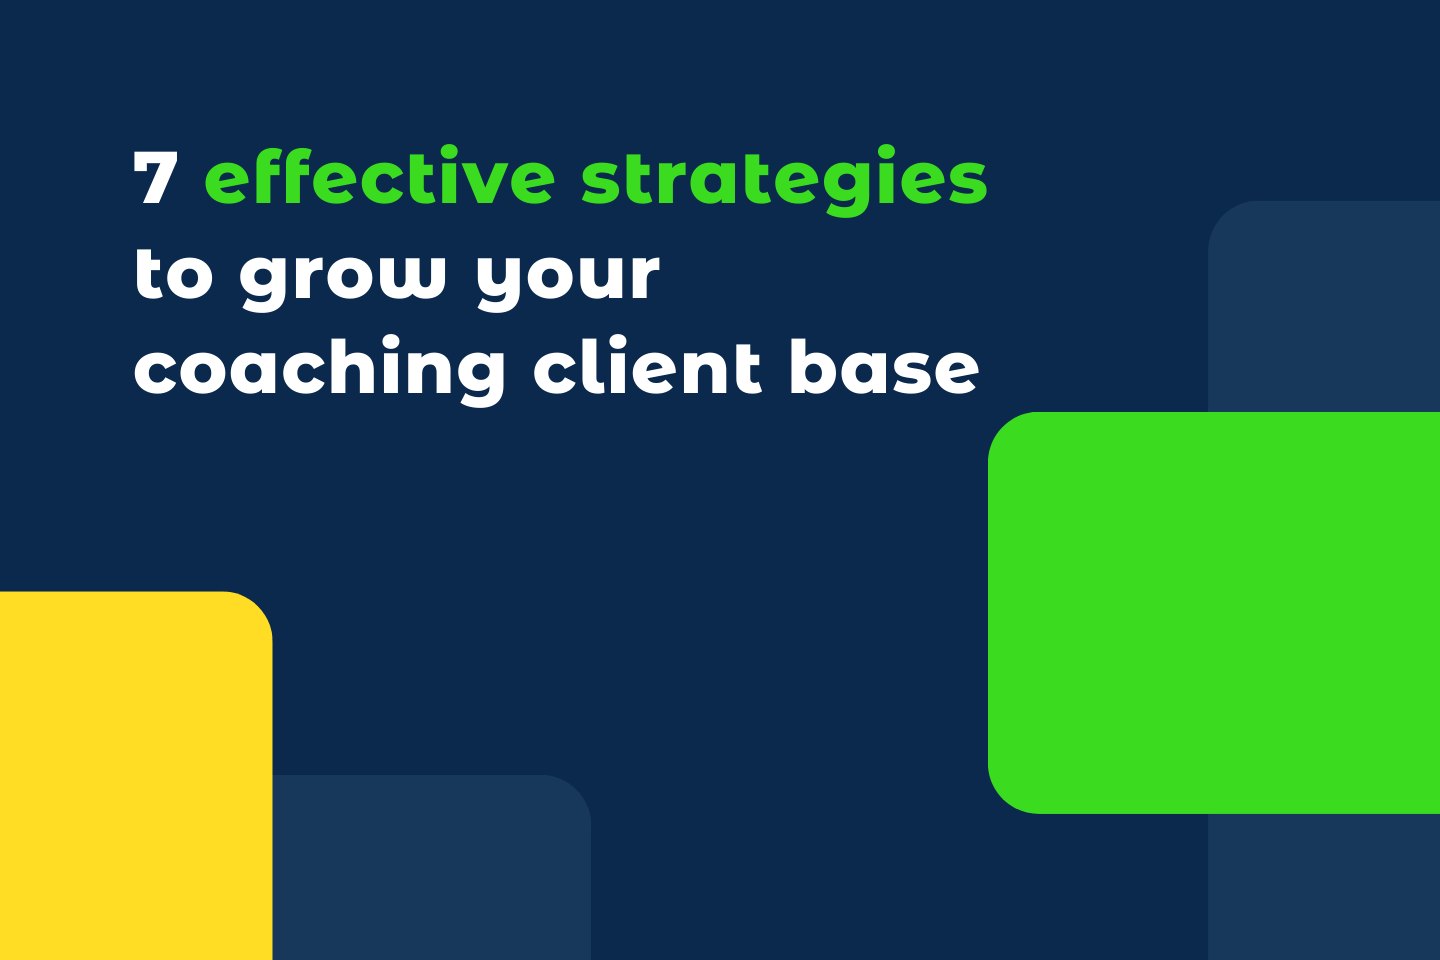 7 effective strategies to grow your coaching client base